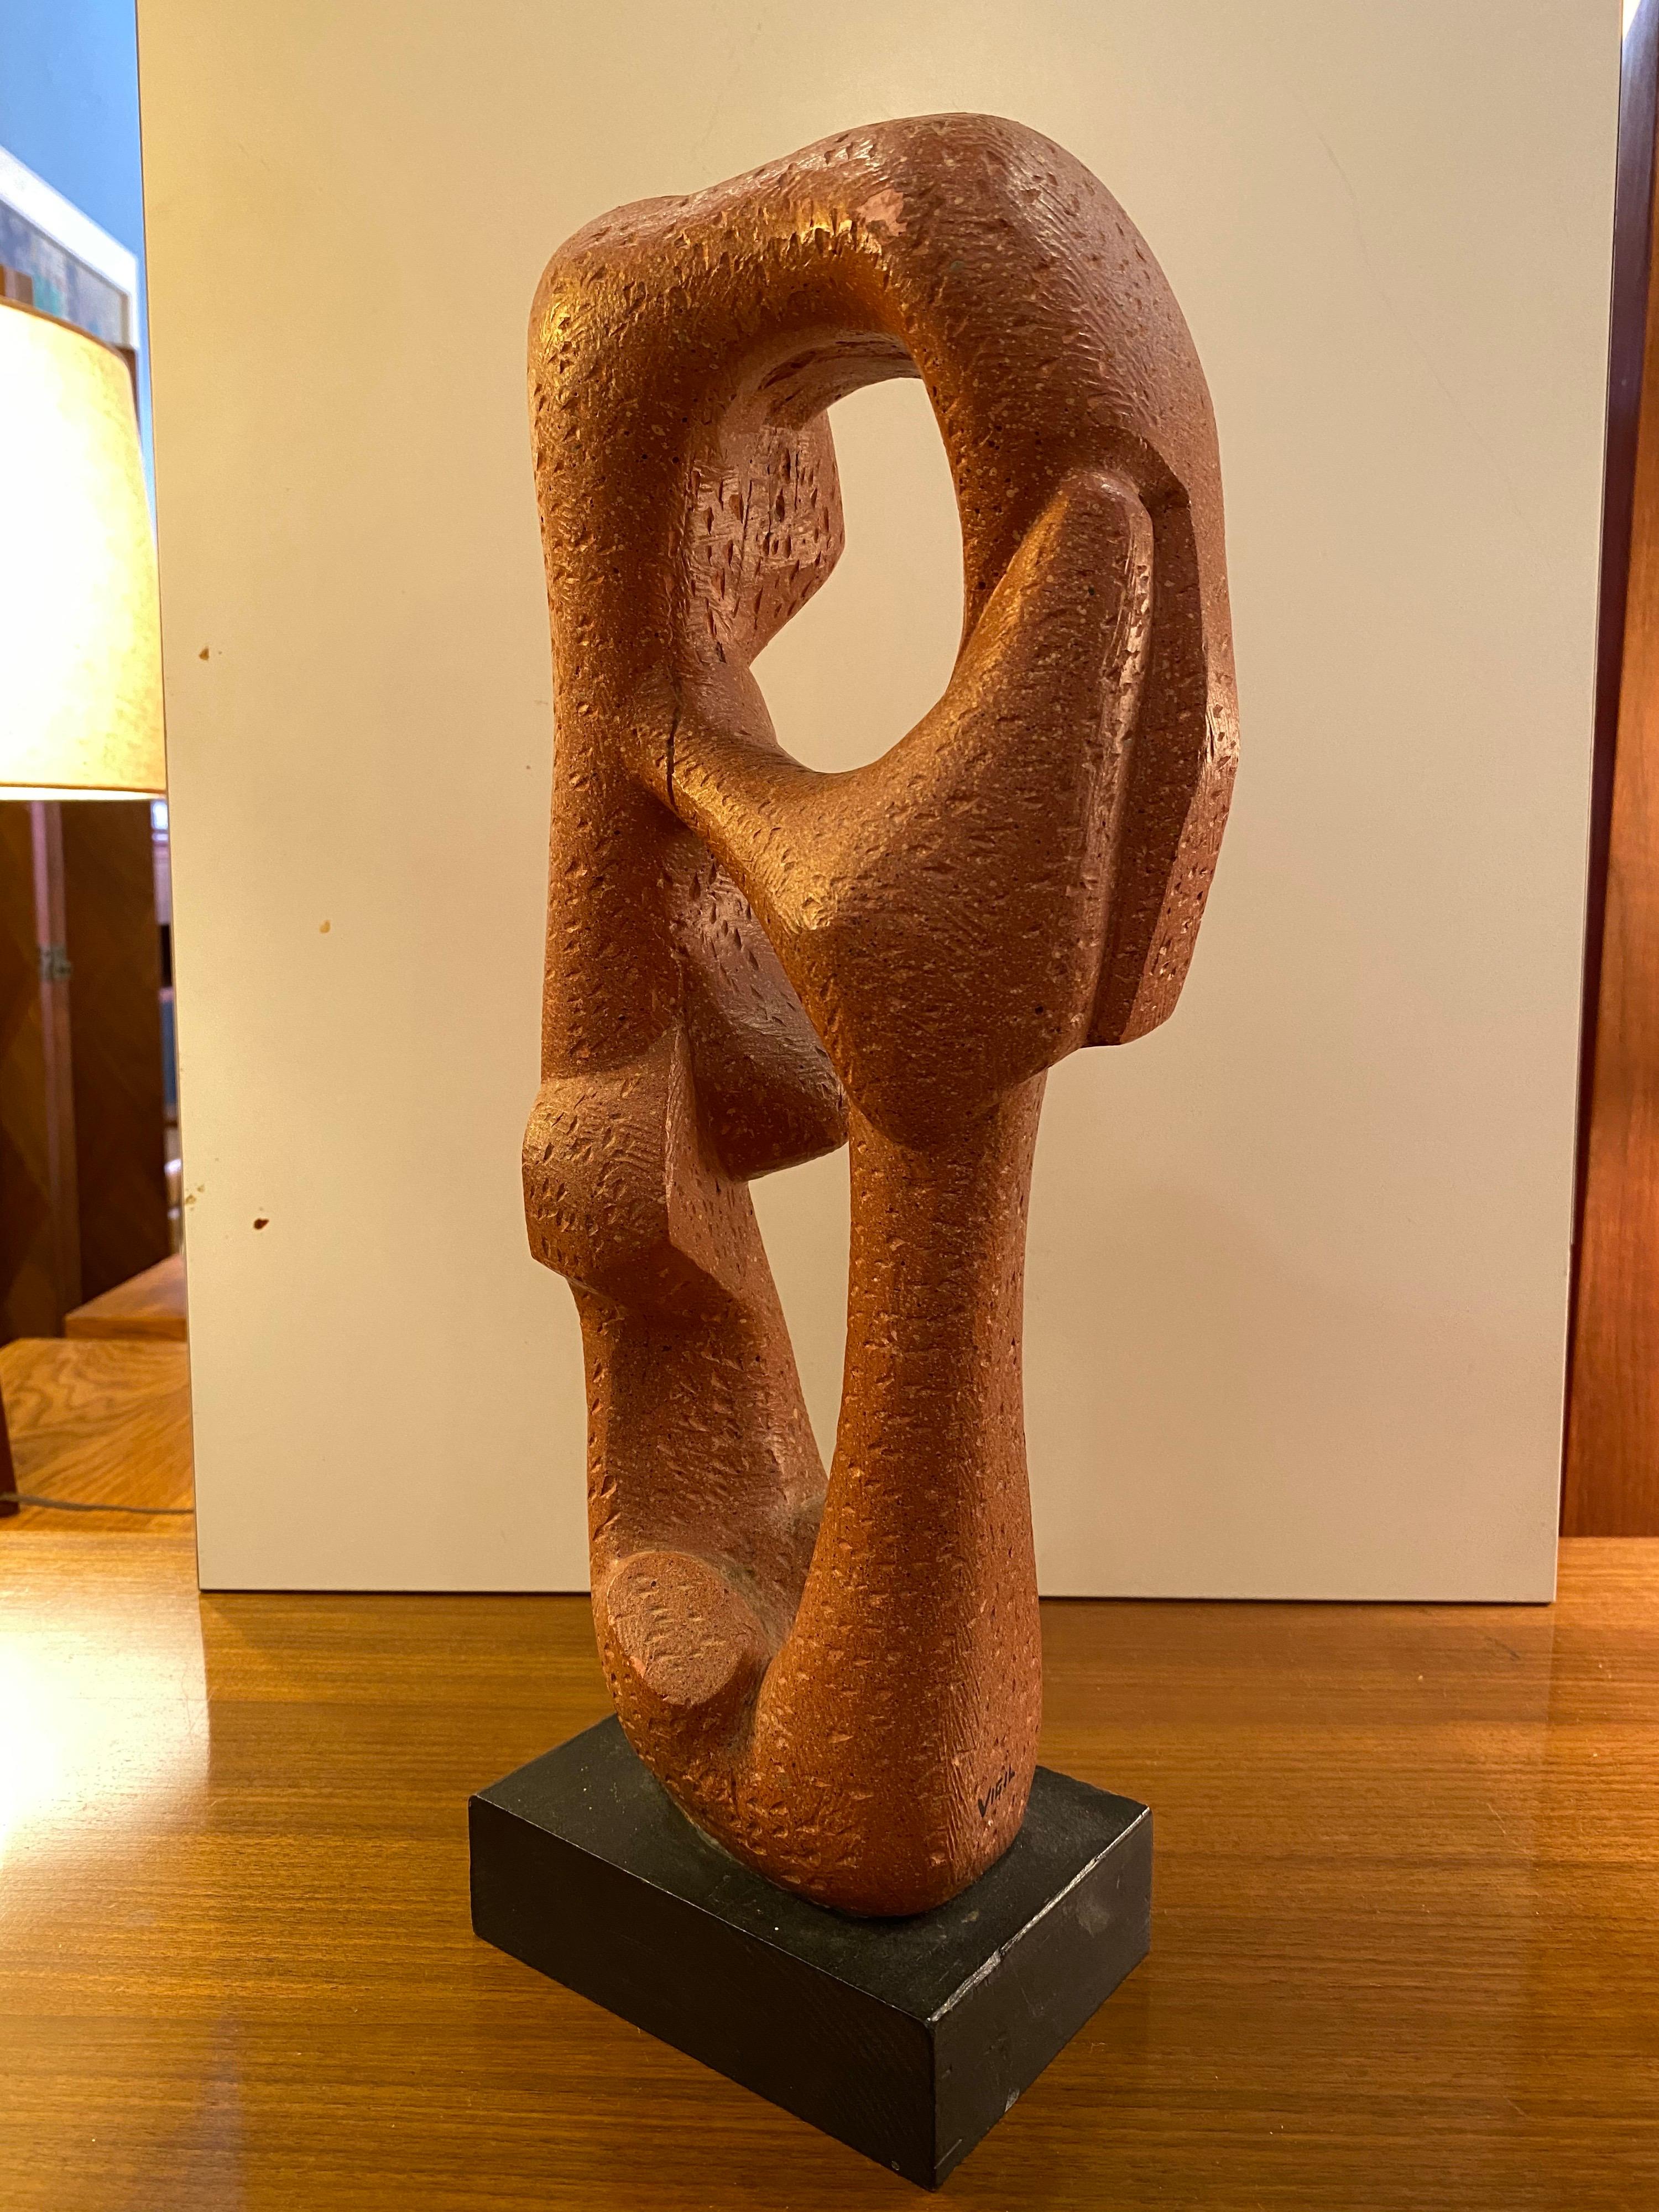 Abstract sculpture marked Vigil. Cast Hydrostone sculpture with a coral finish, mounted on a black wood base. From my research designed and produced in Texas in the 1950s.